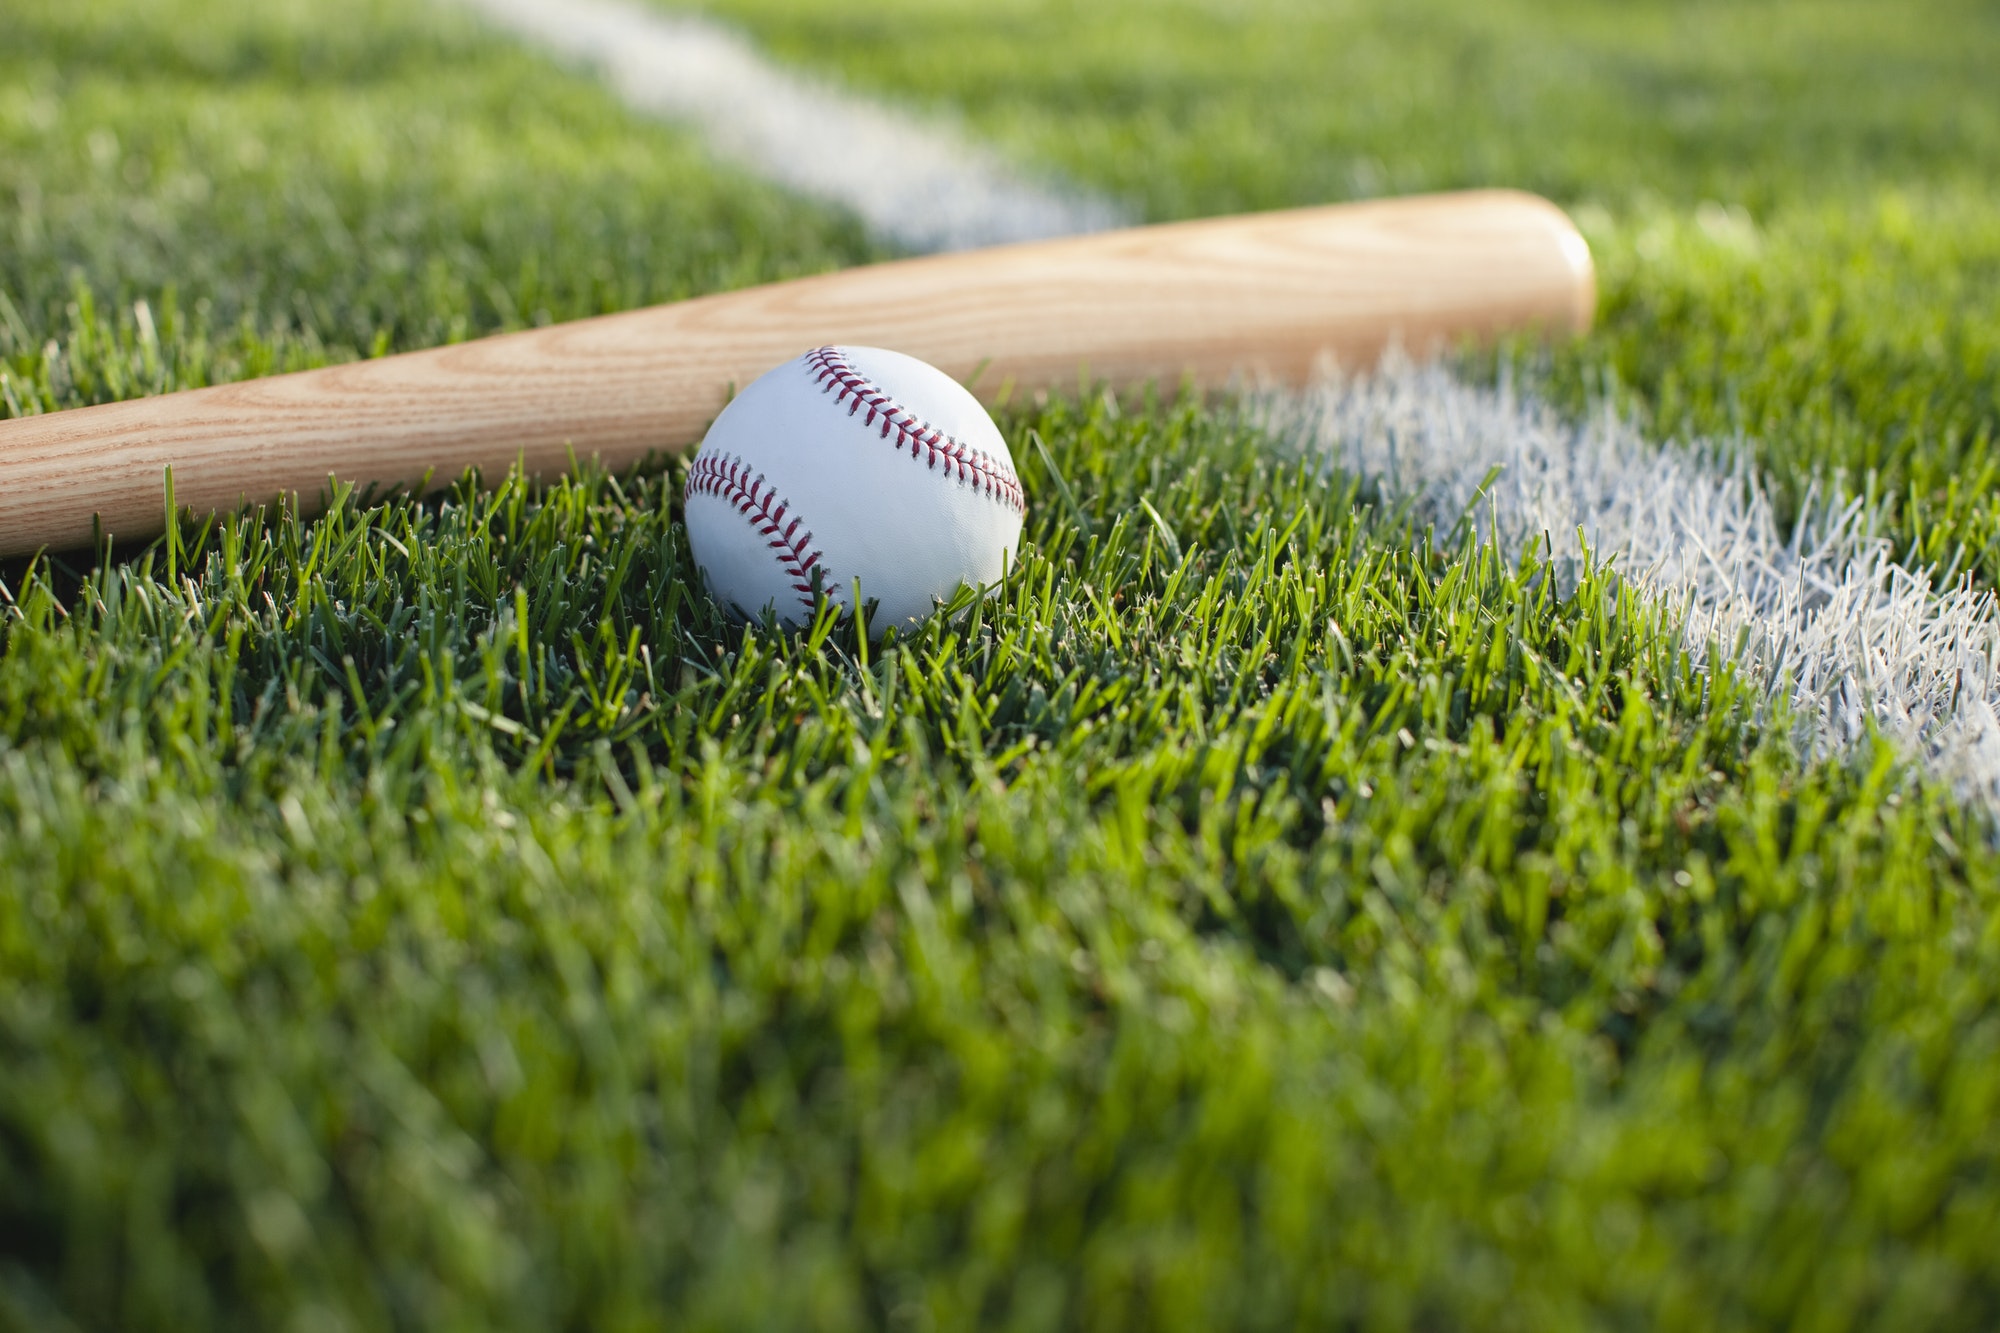 Baseball and Bat on Grass Field with White Stripe